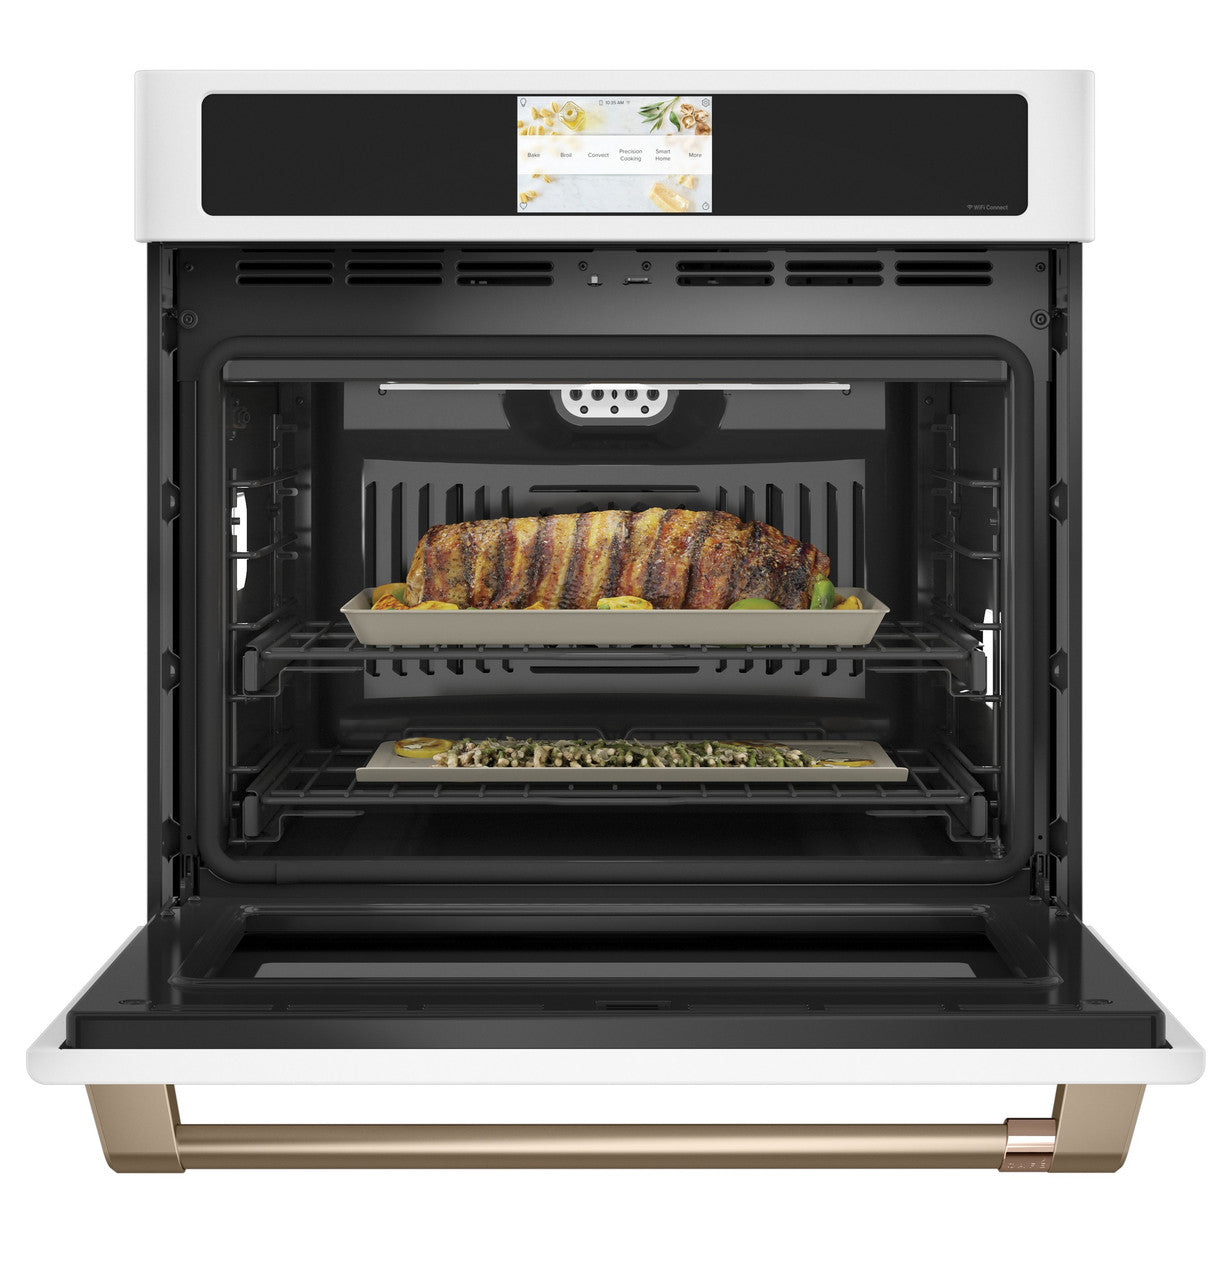 Café - 5 cu. ft Single Wall Oven in White - CTS90DP4NW2